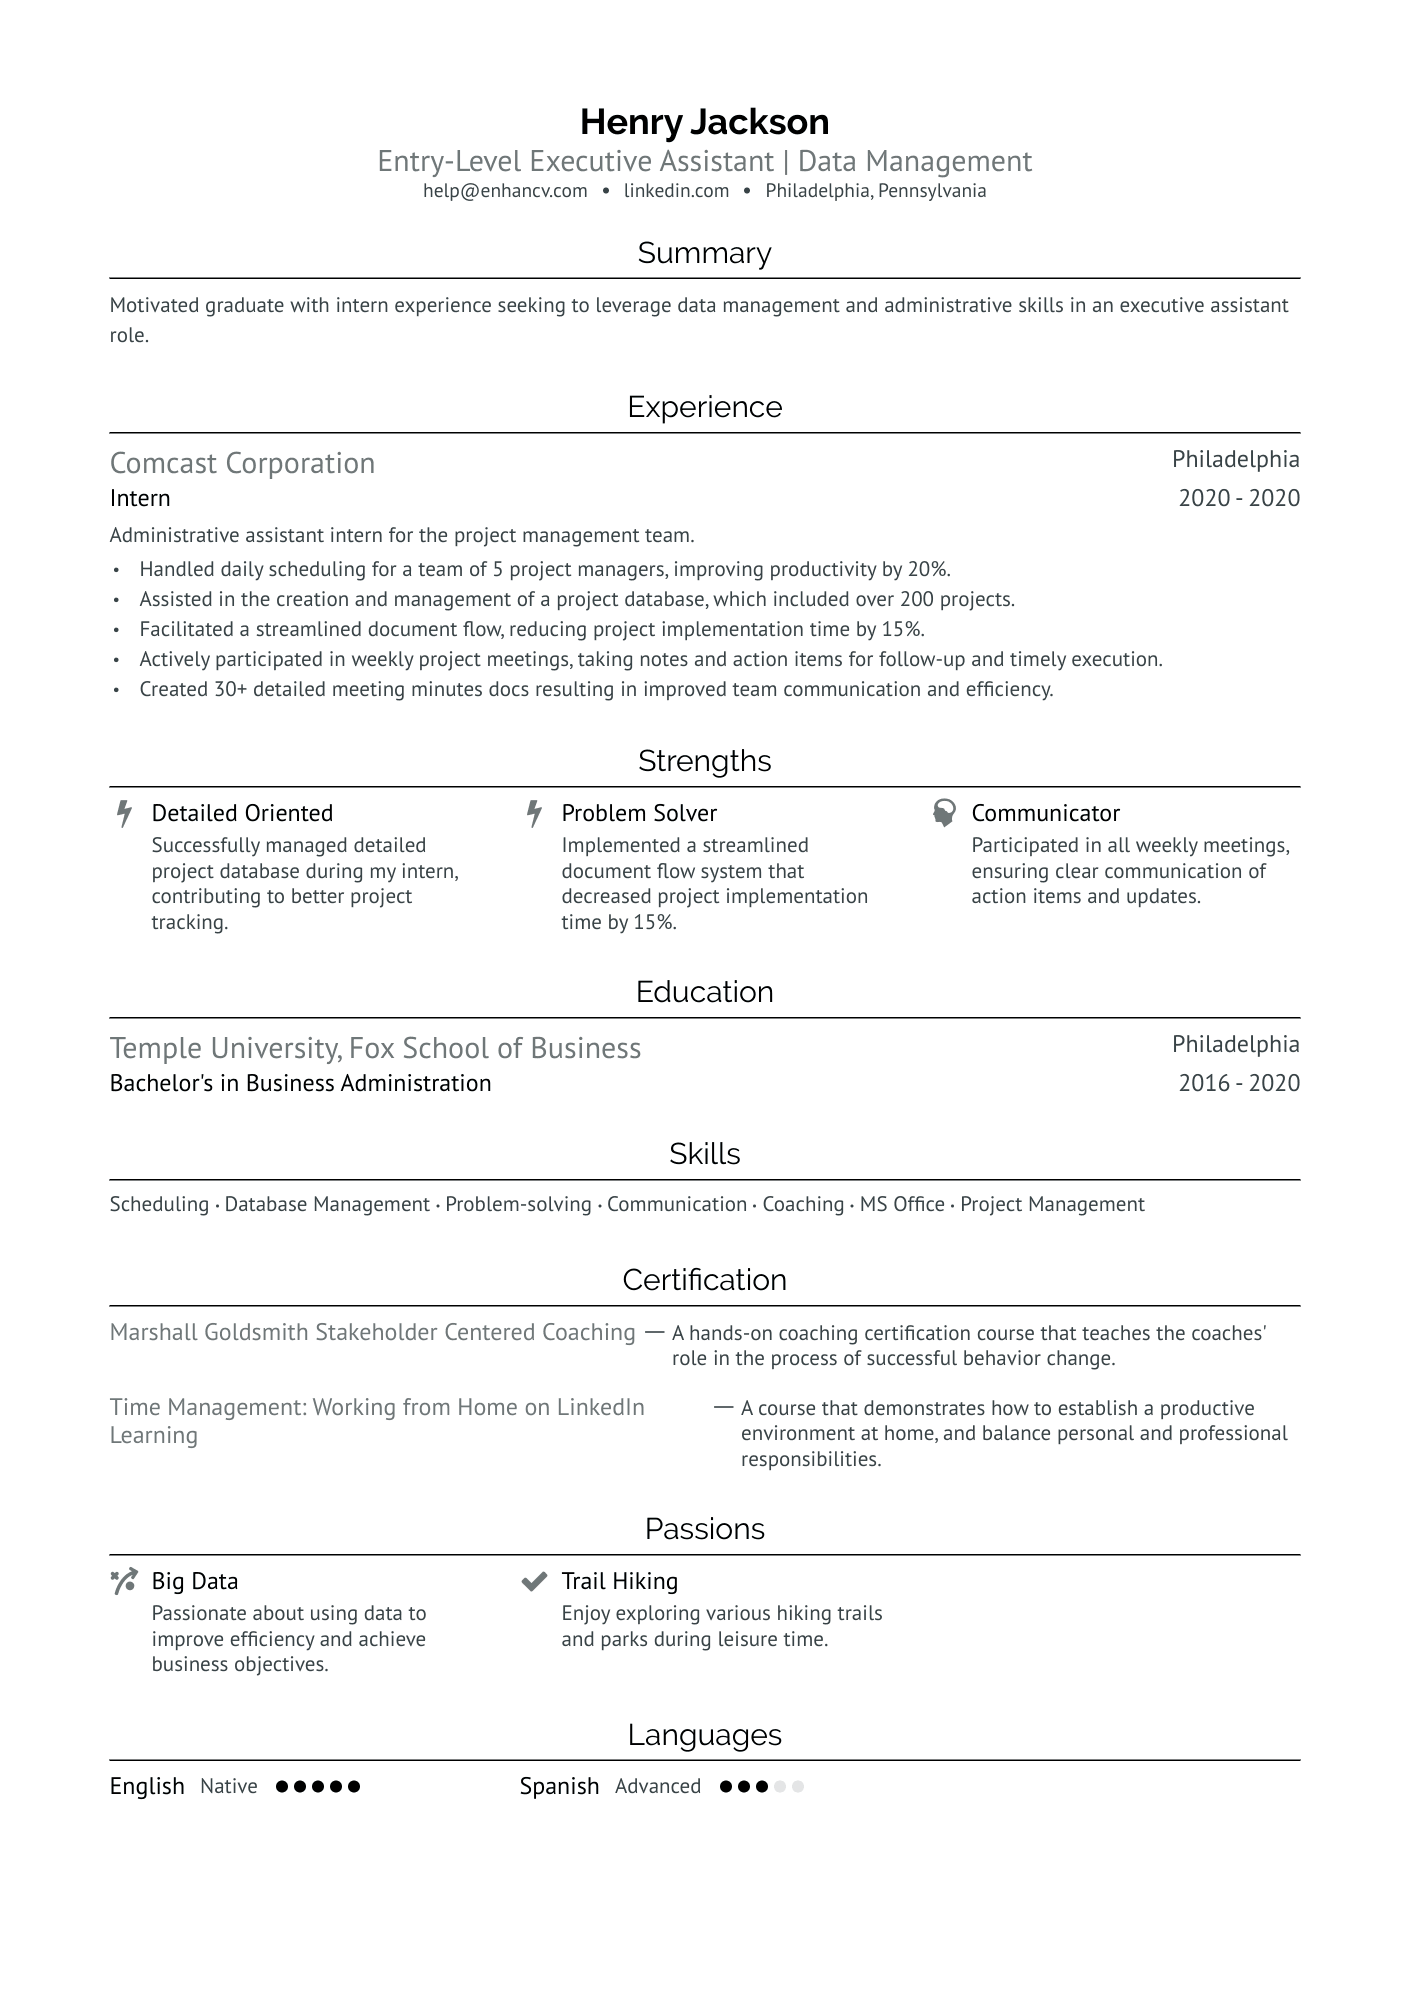 Entry Level Executive Assistant Resume Example